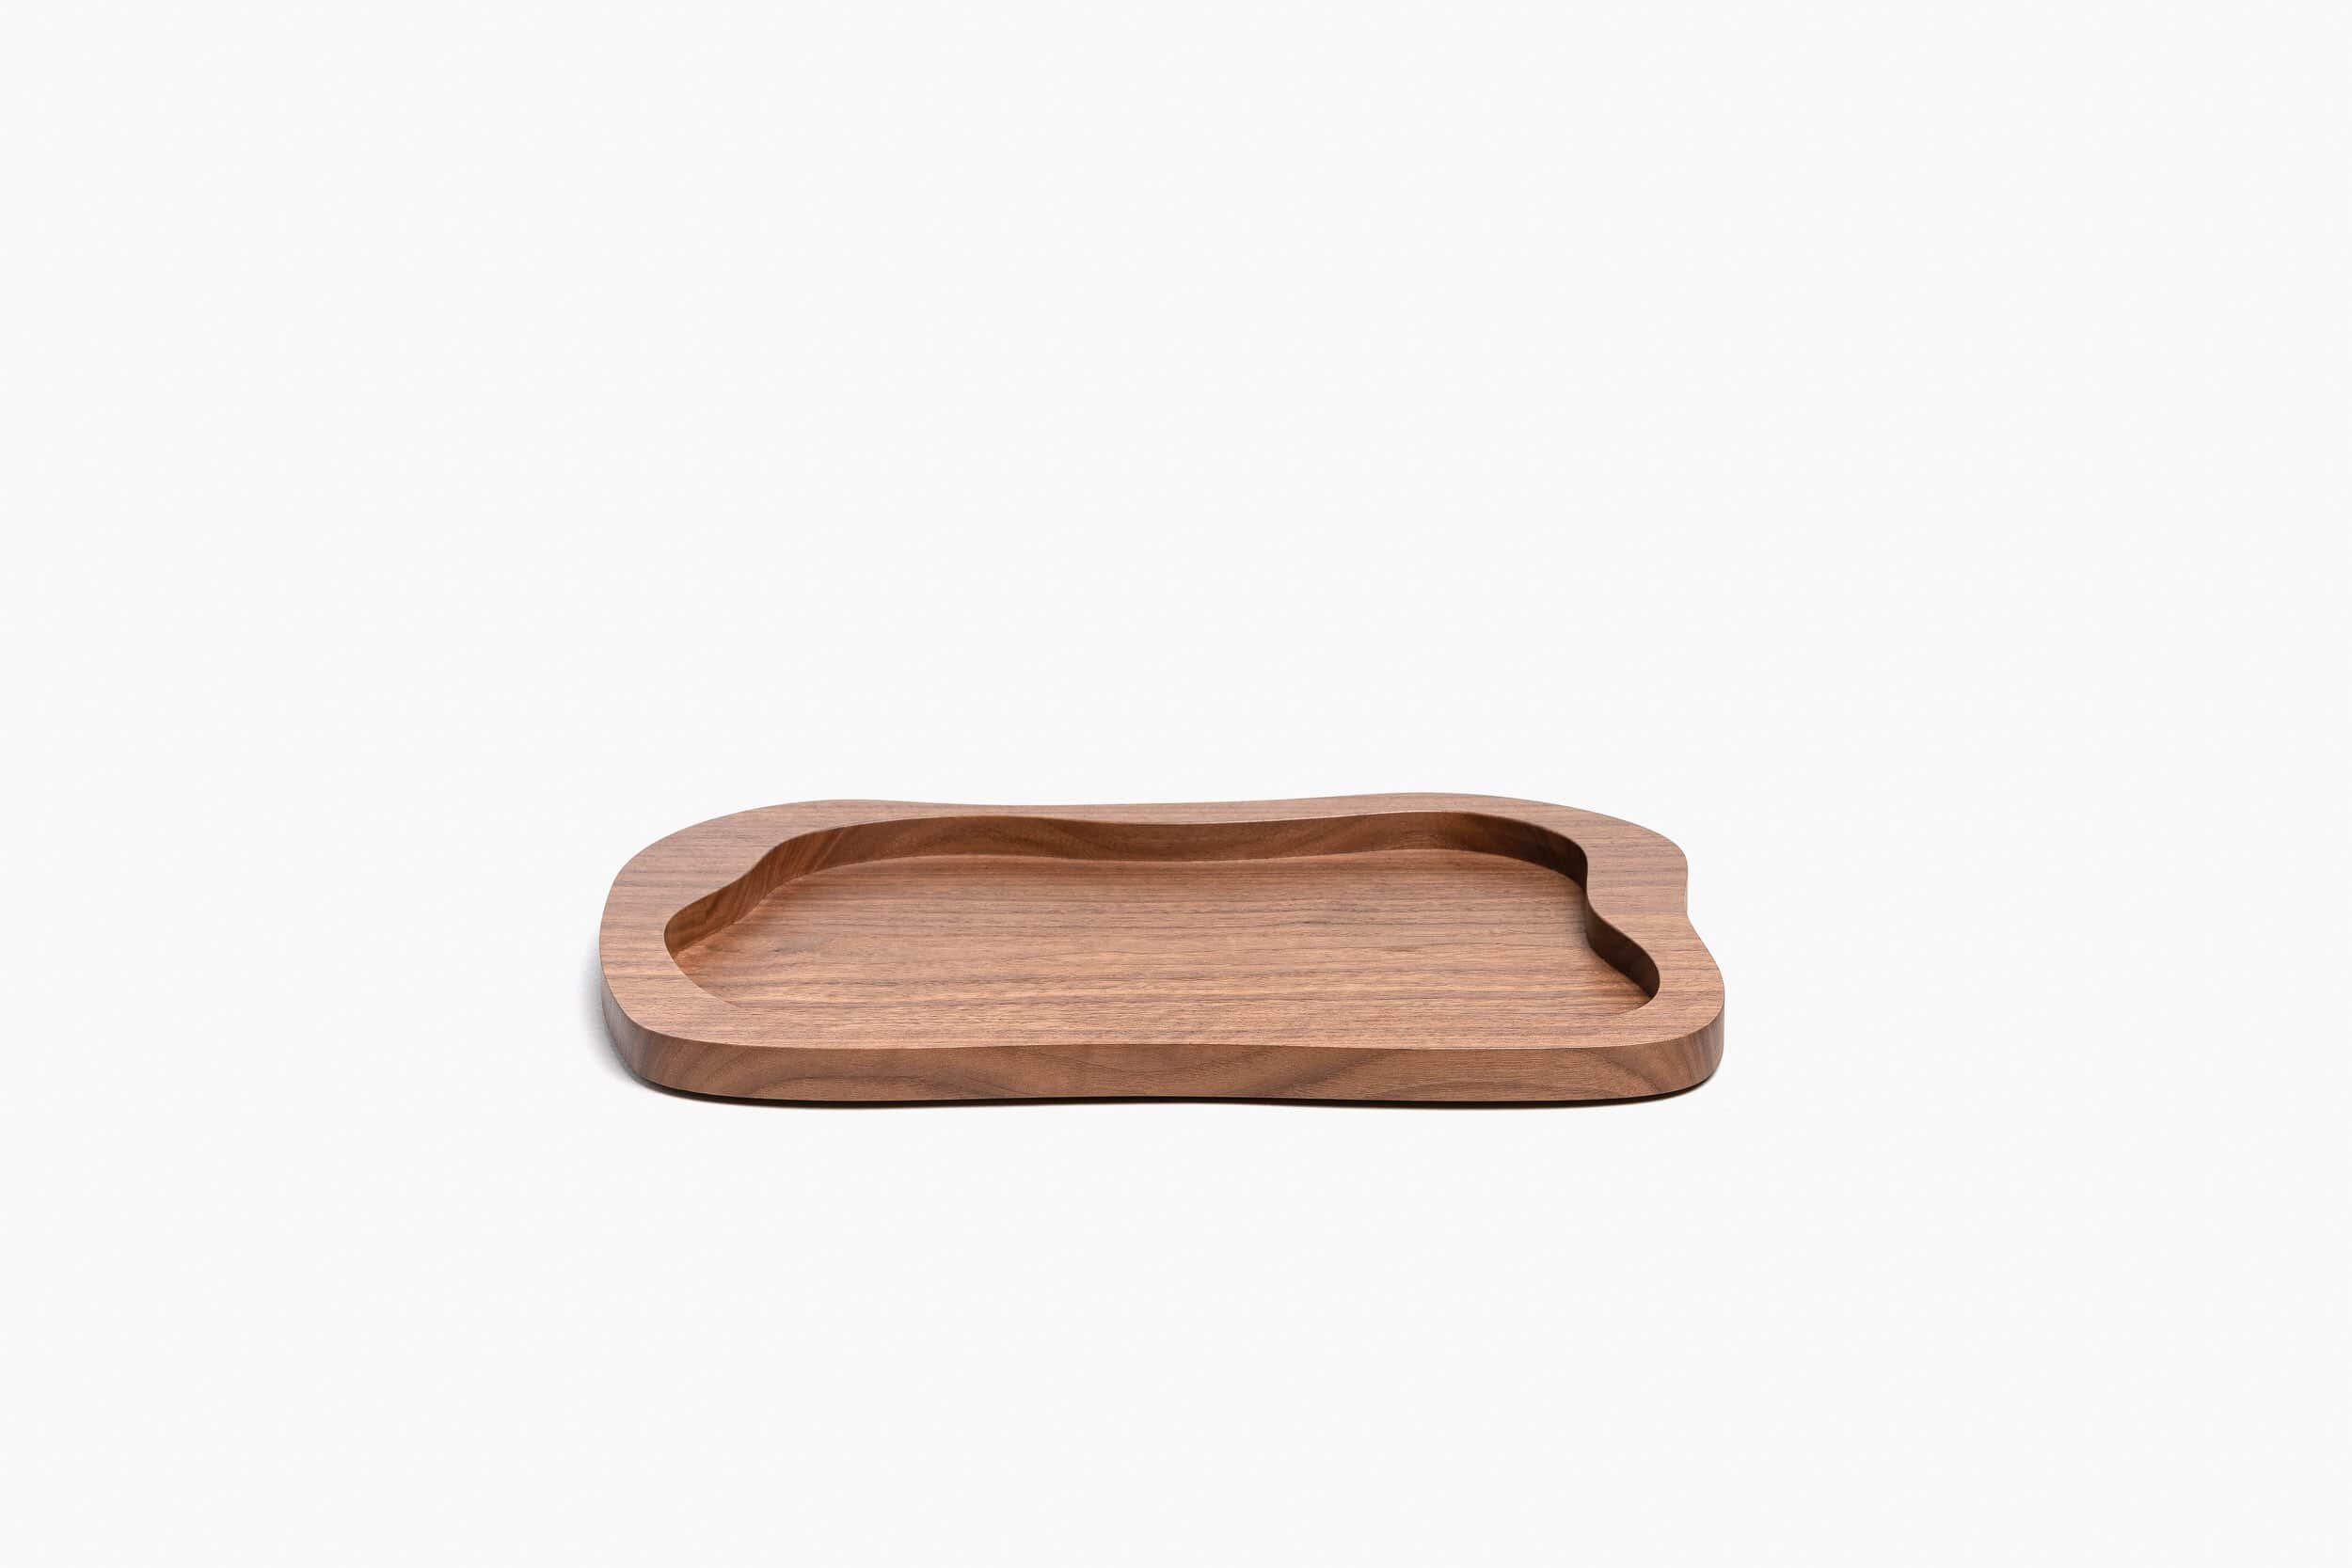 Wooden Egg Tray Handcrafted Walnut with Waterfall Edges